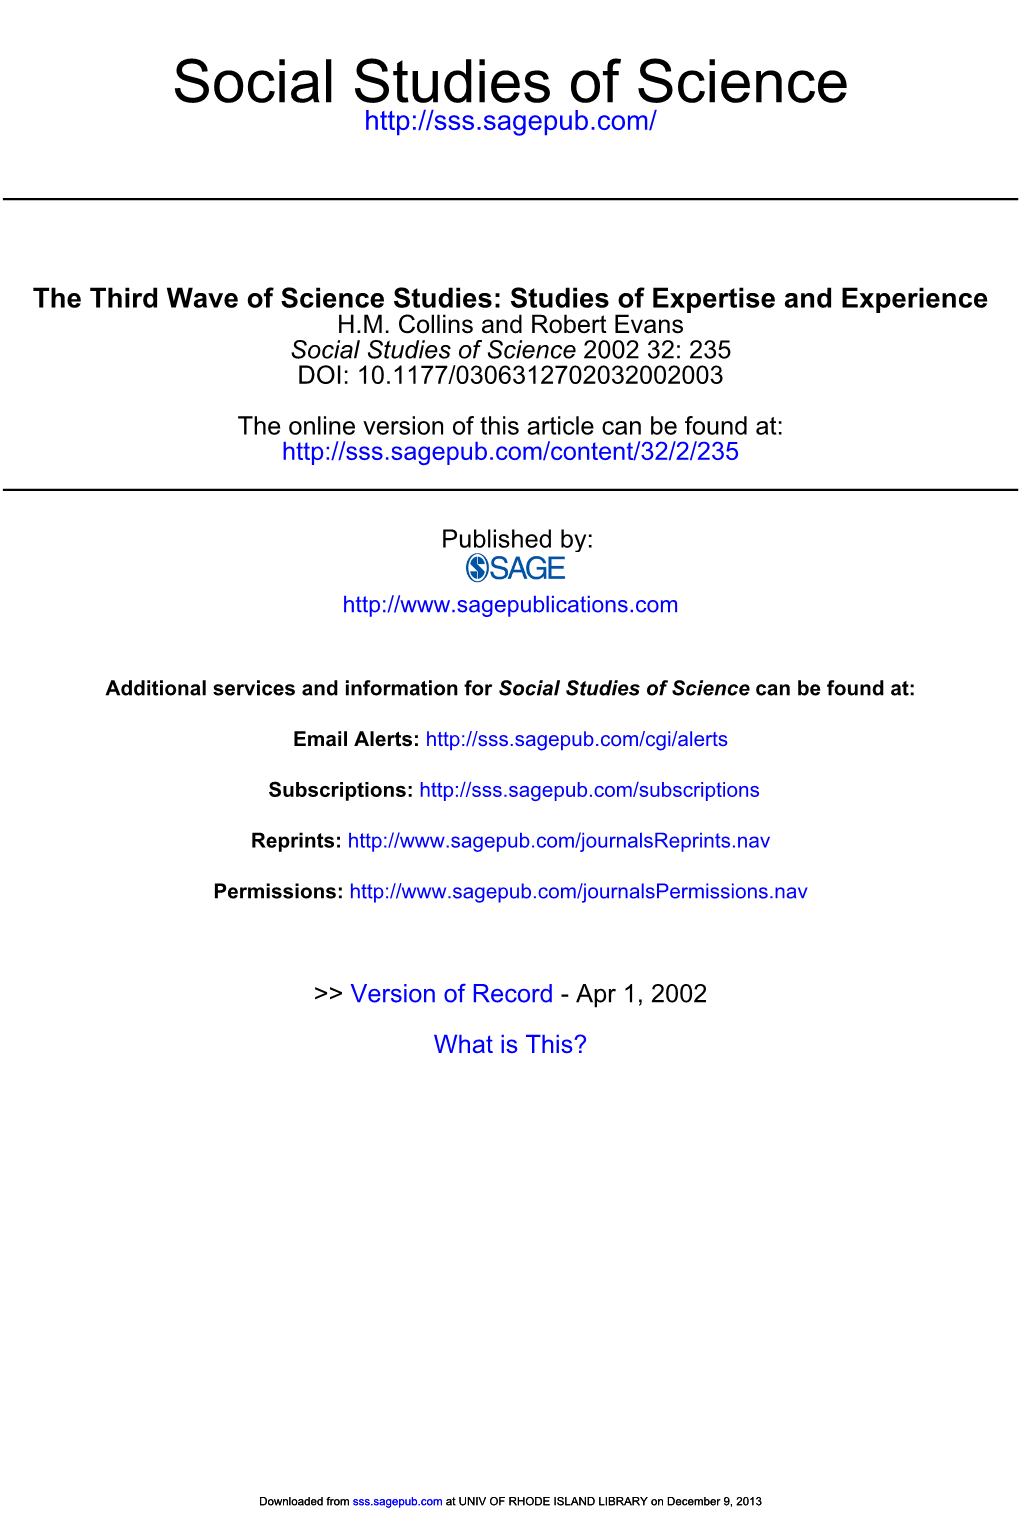 Third Wave of Science Studies: Studies of Expertise and Experience H.M